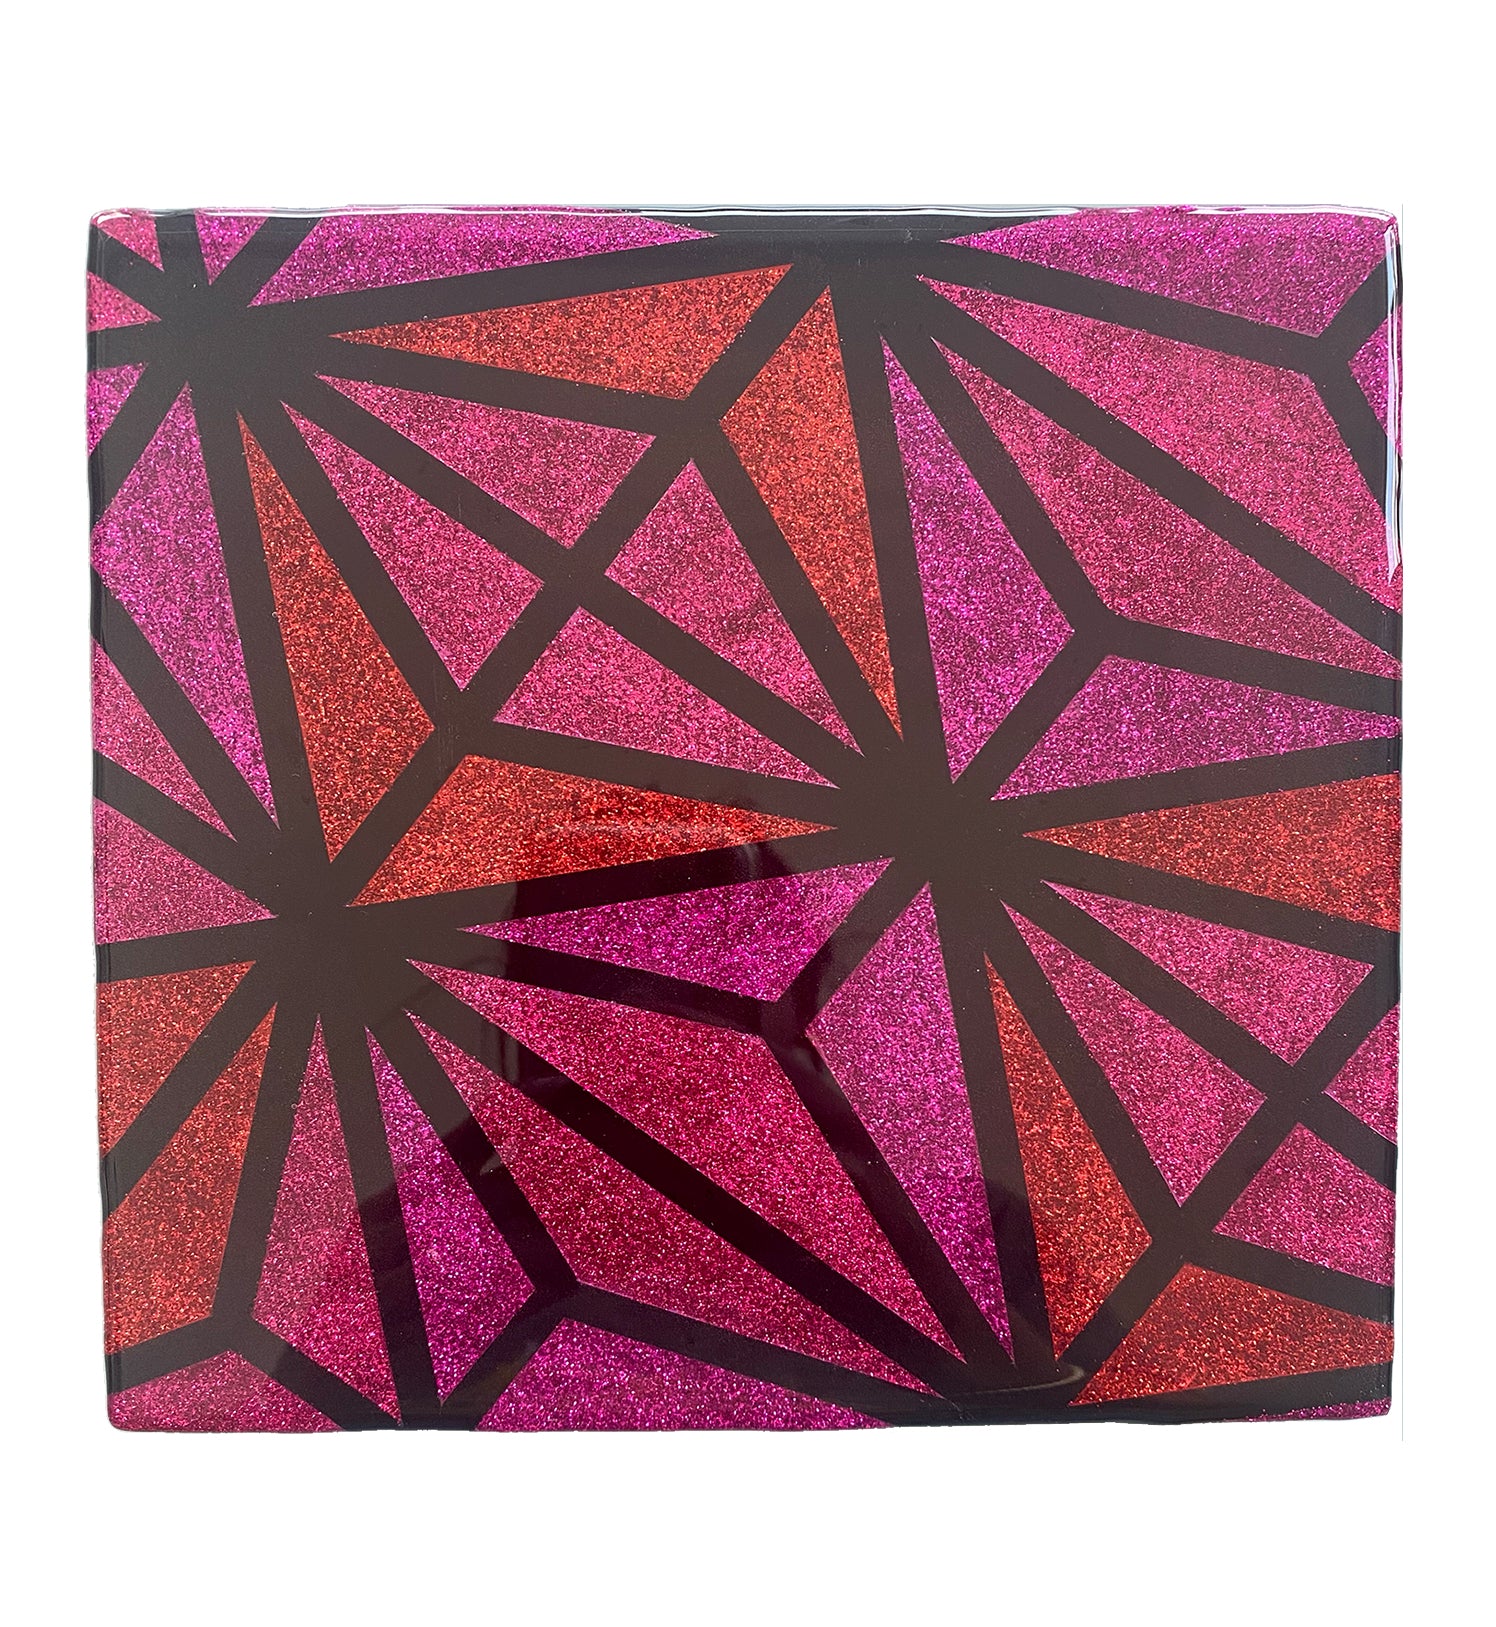 Resin Art Media Pink Wall May Triangles Glitter Care Geometric Devils – Mixed and